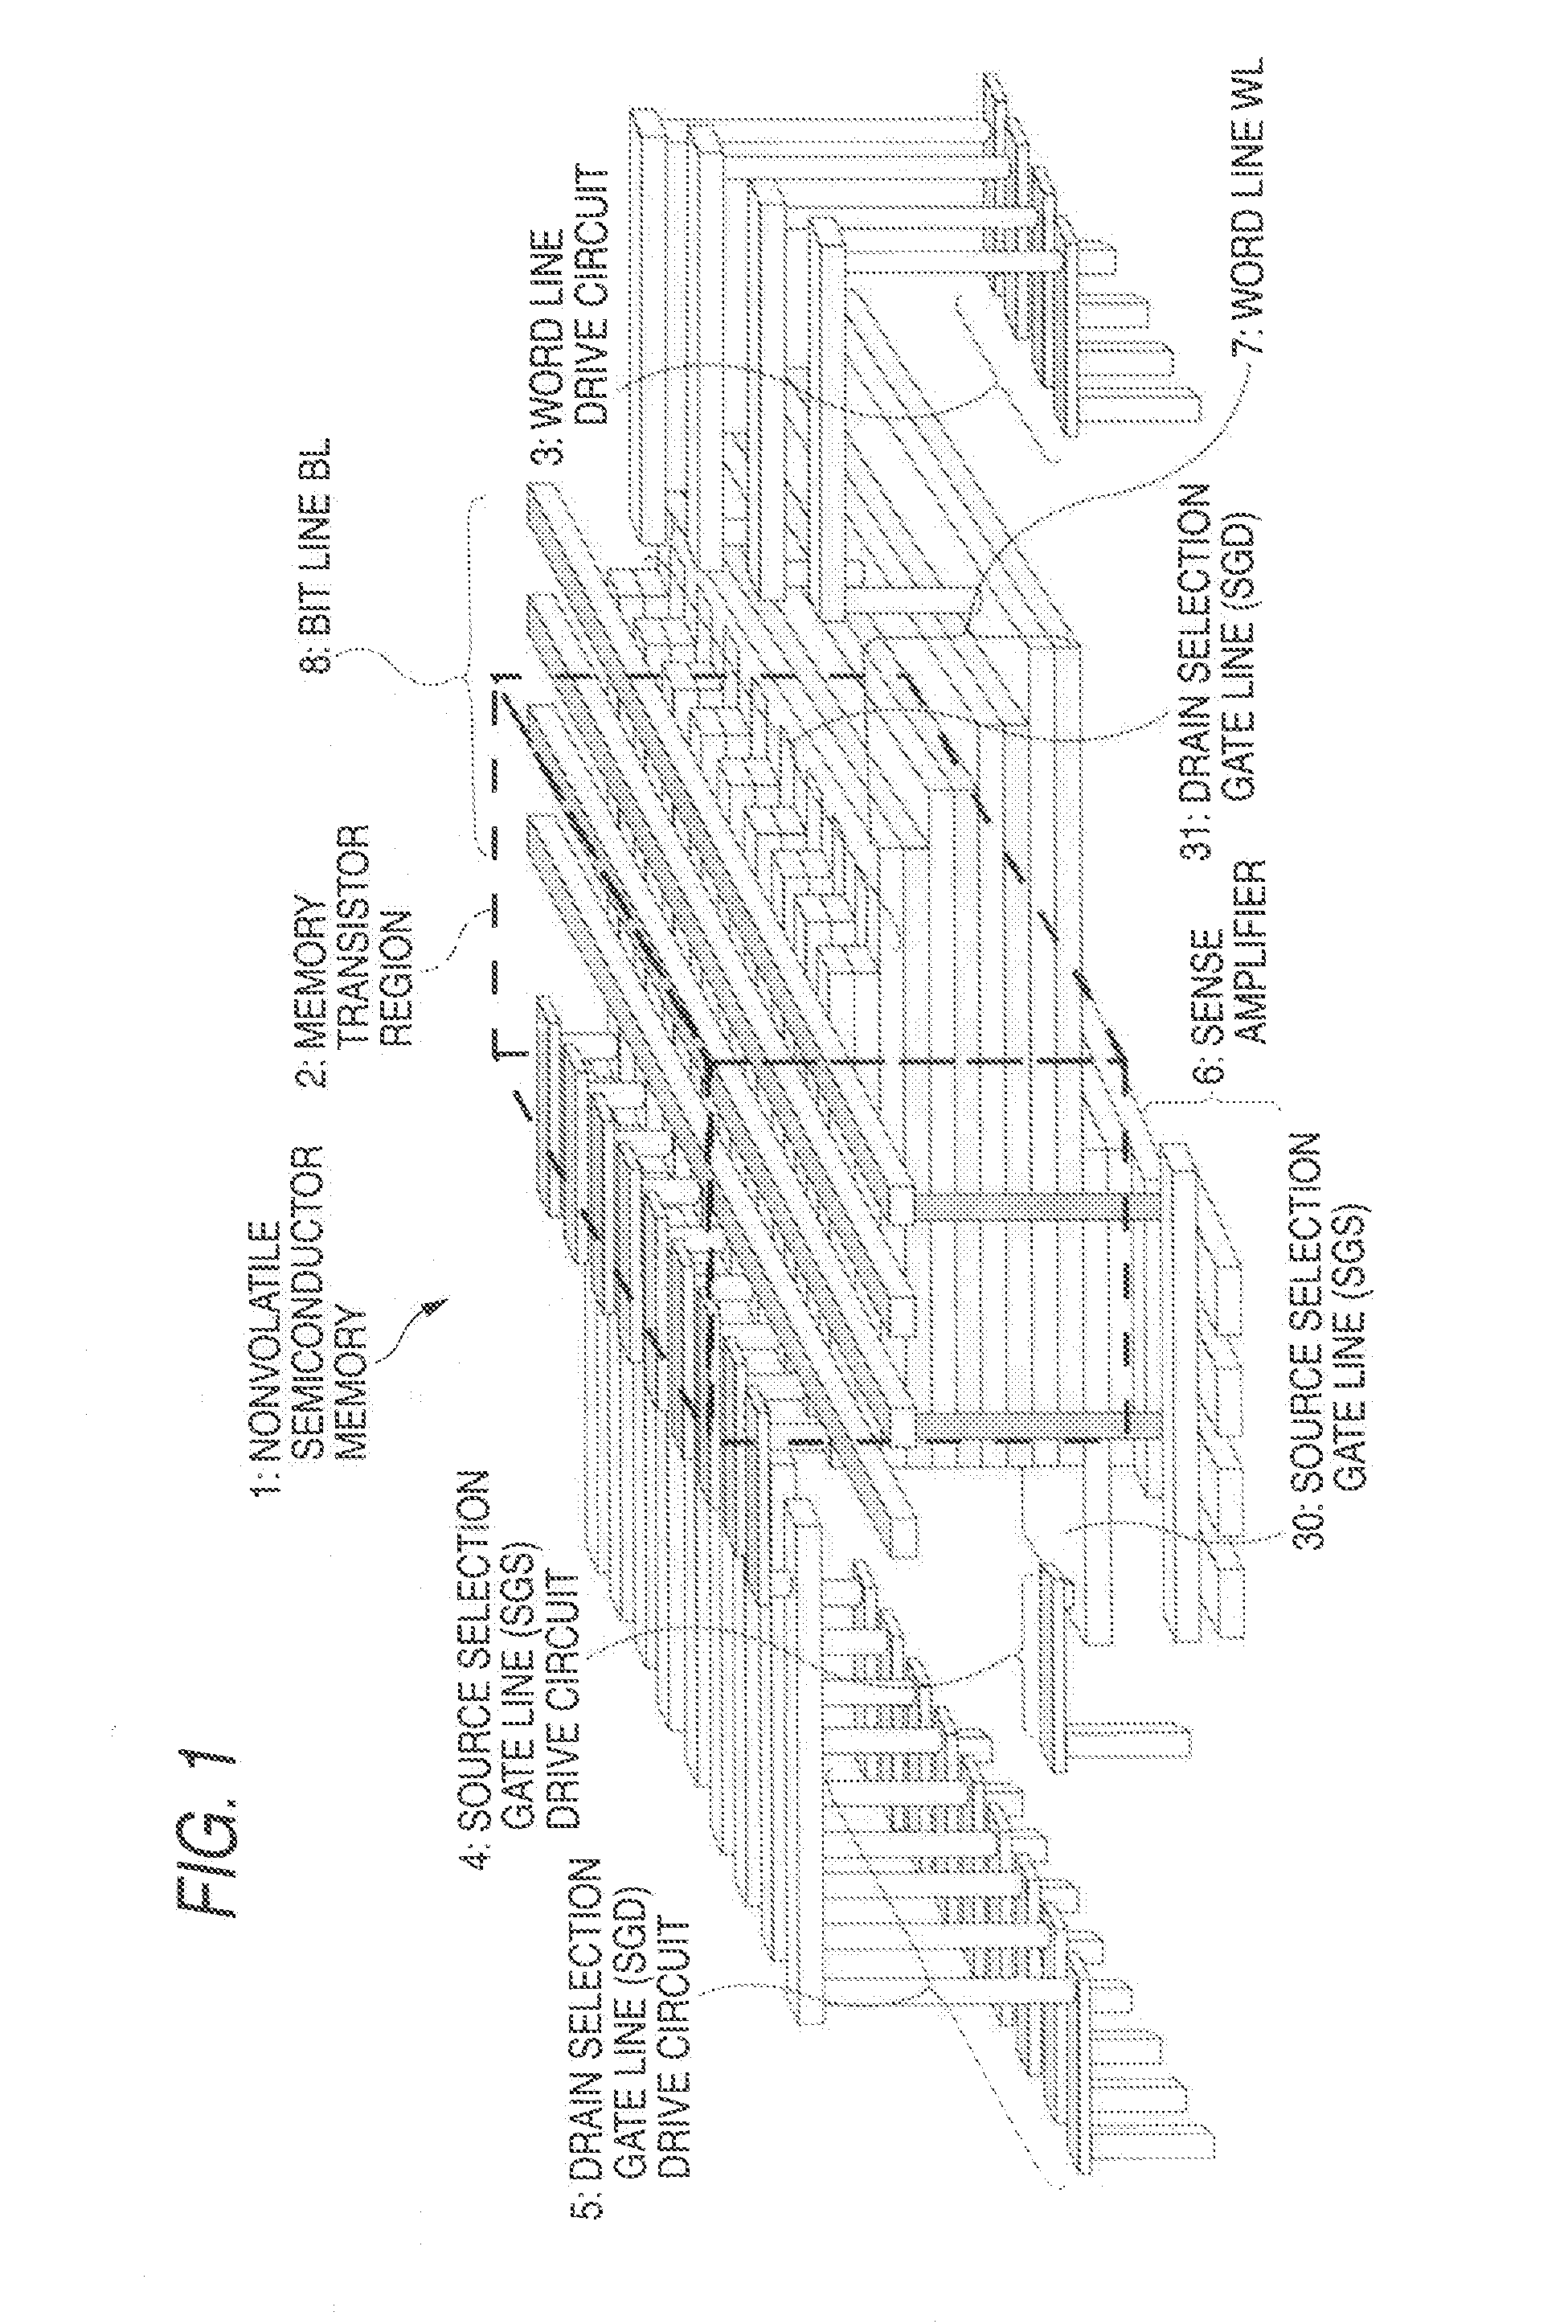 Nonvolatile semiconductor memory  and method for manufacturing the same